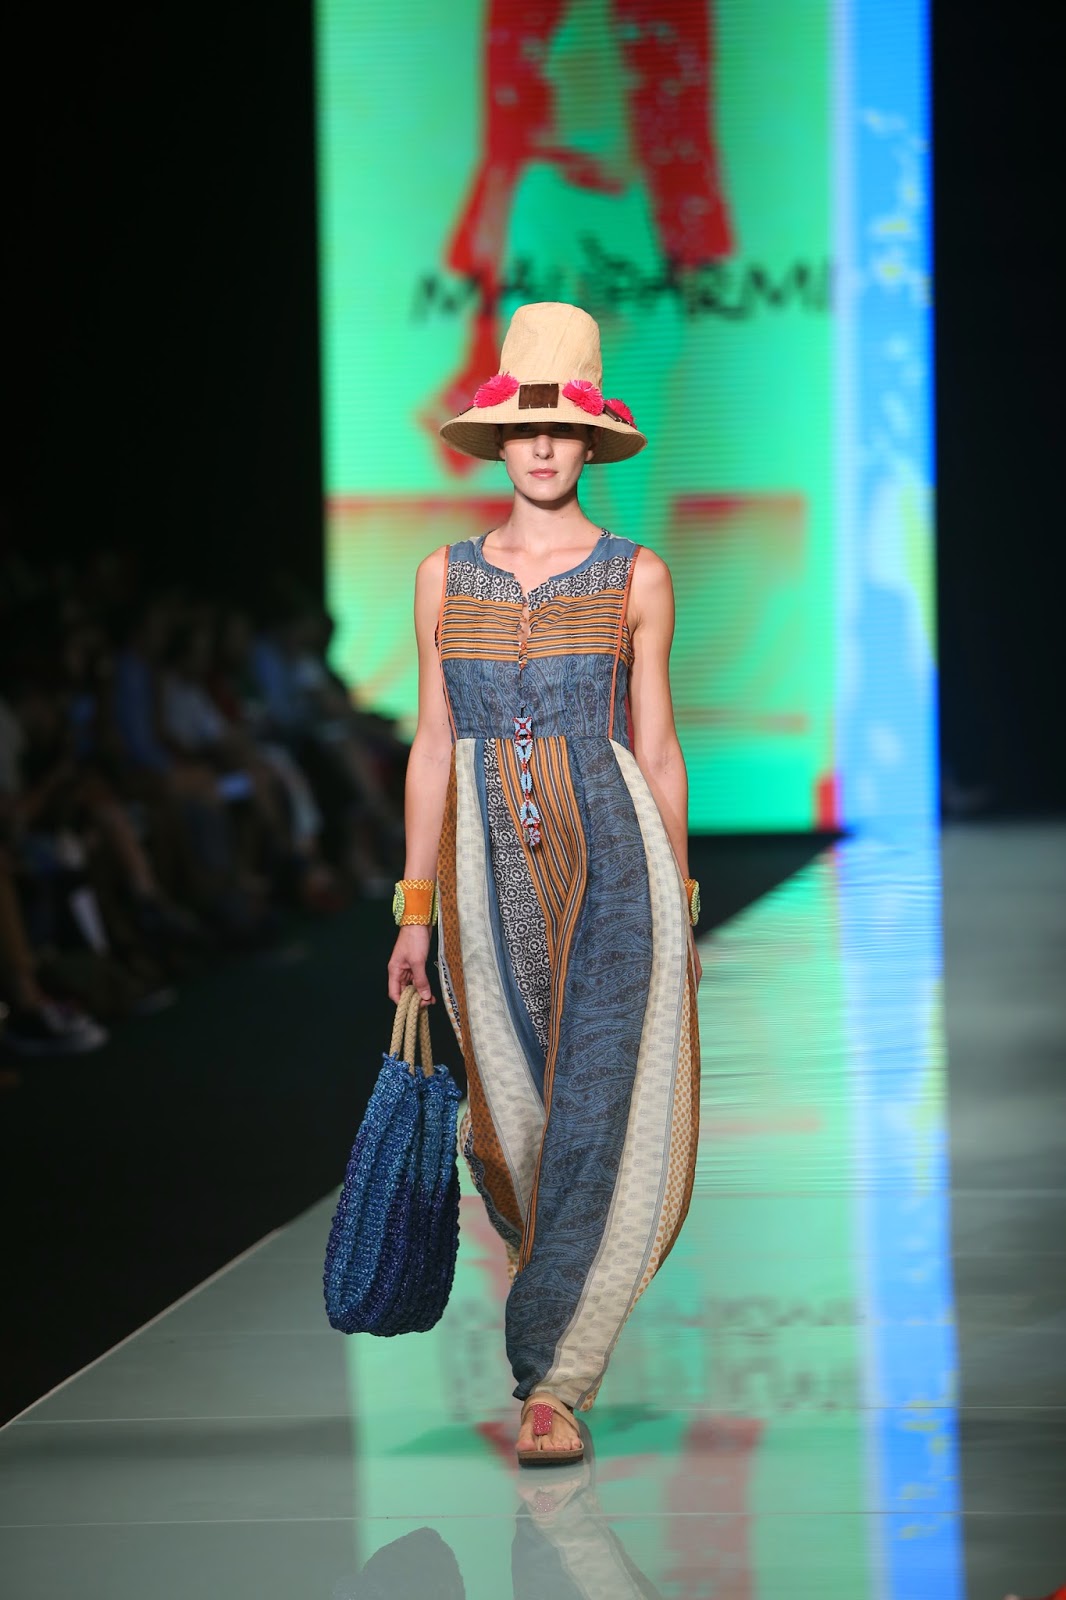 Miami Fashion Week 2014: Maliparmi, “being yourself is the key to this collection.”